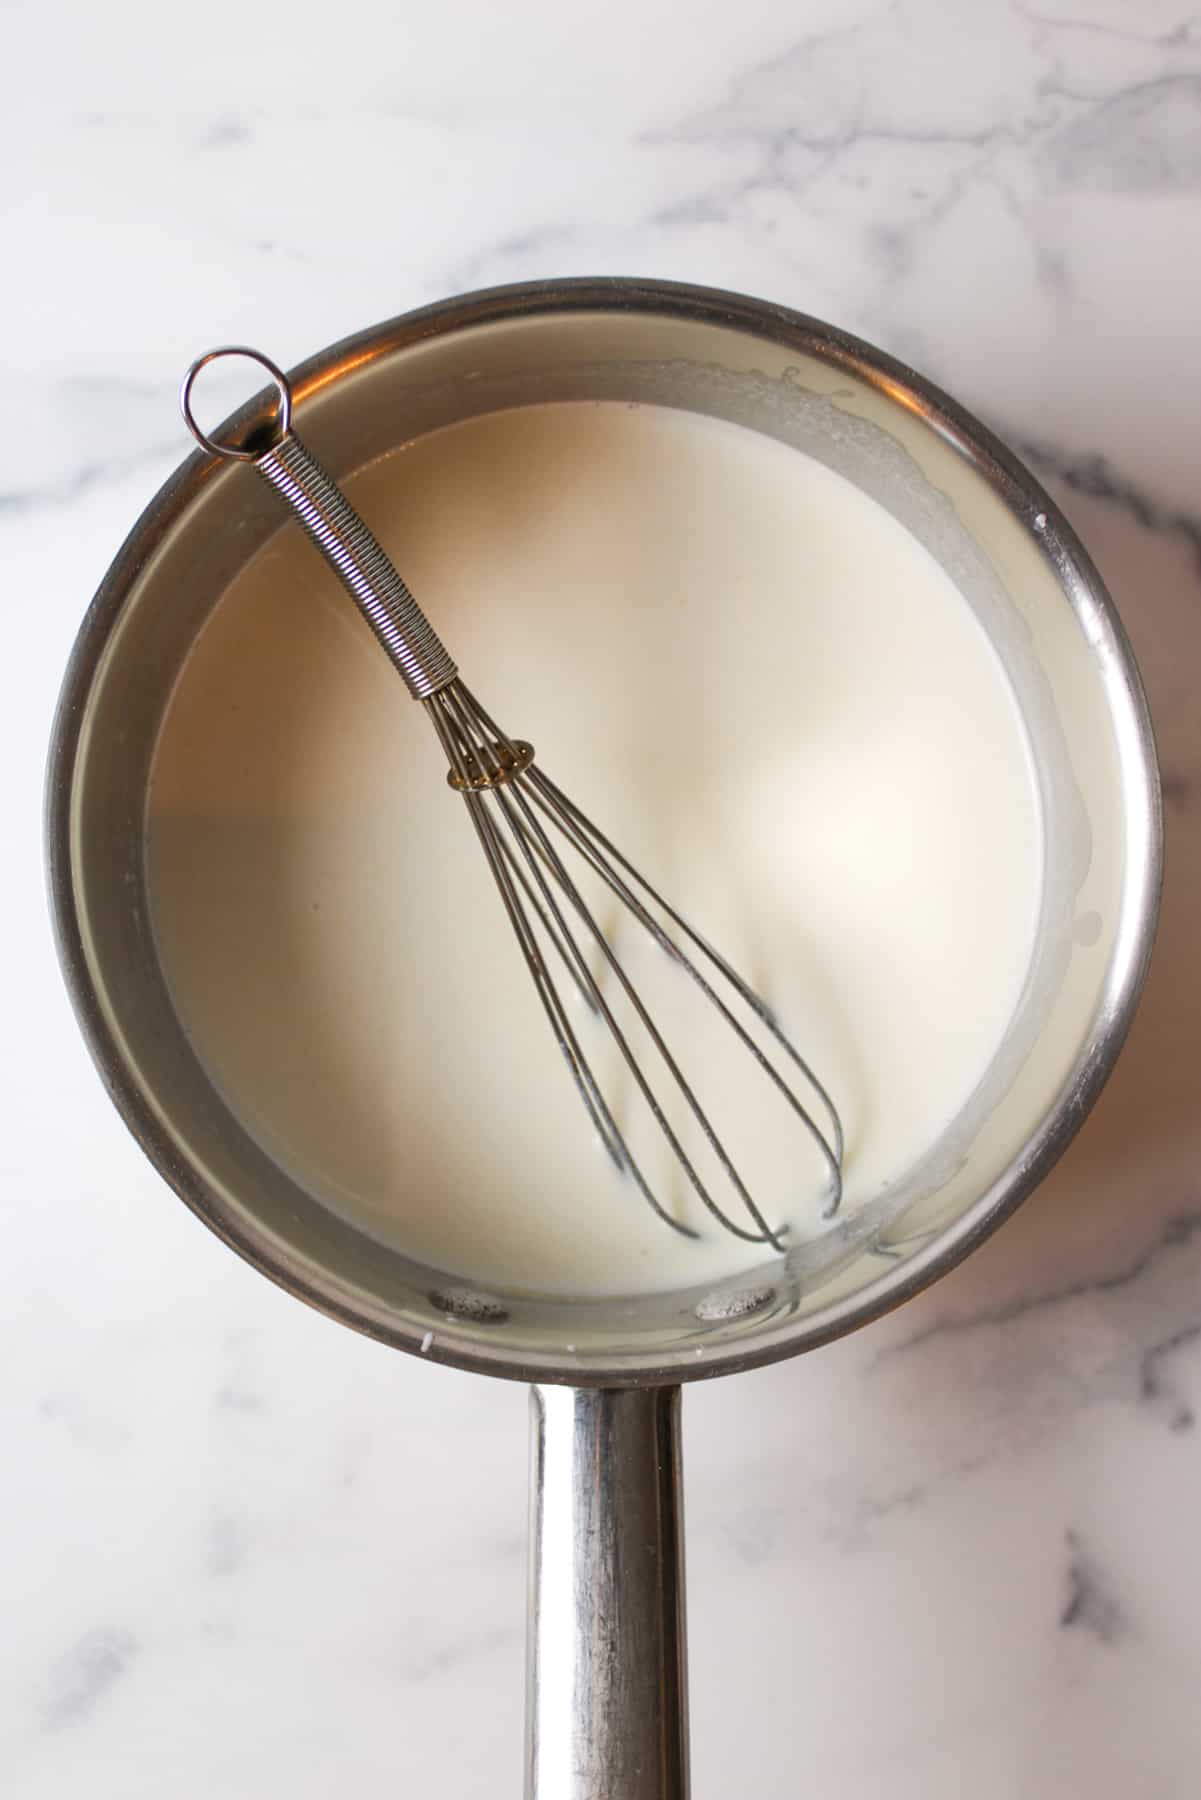 roux sauce in a medium sized pot with a metal whisk.